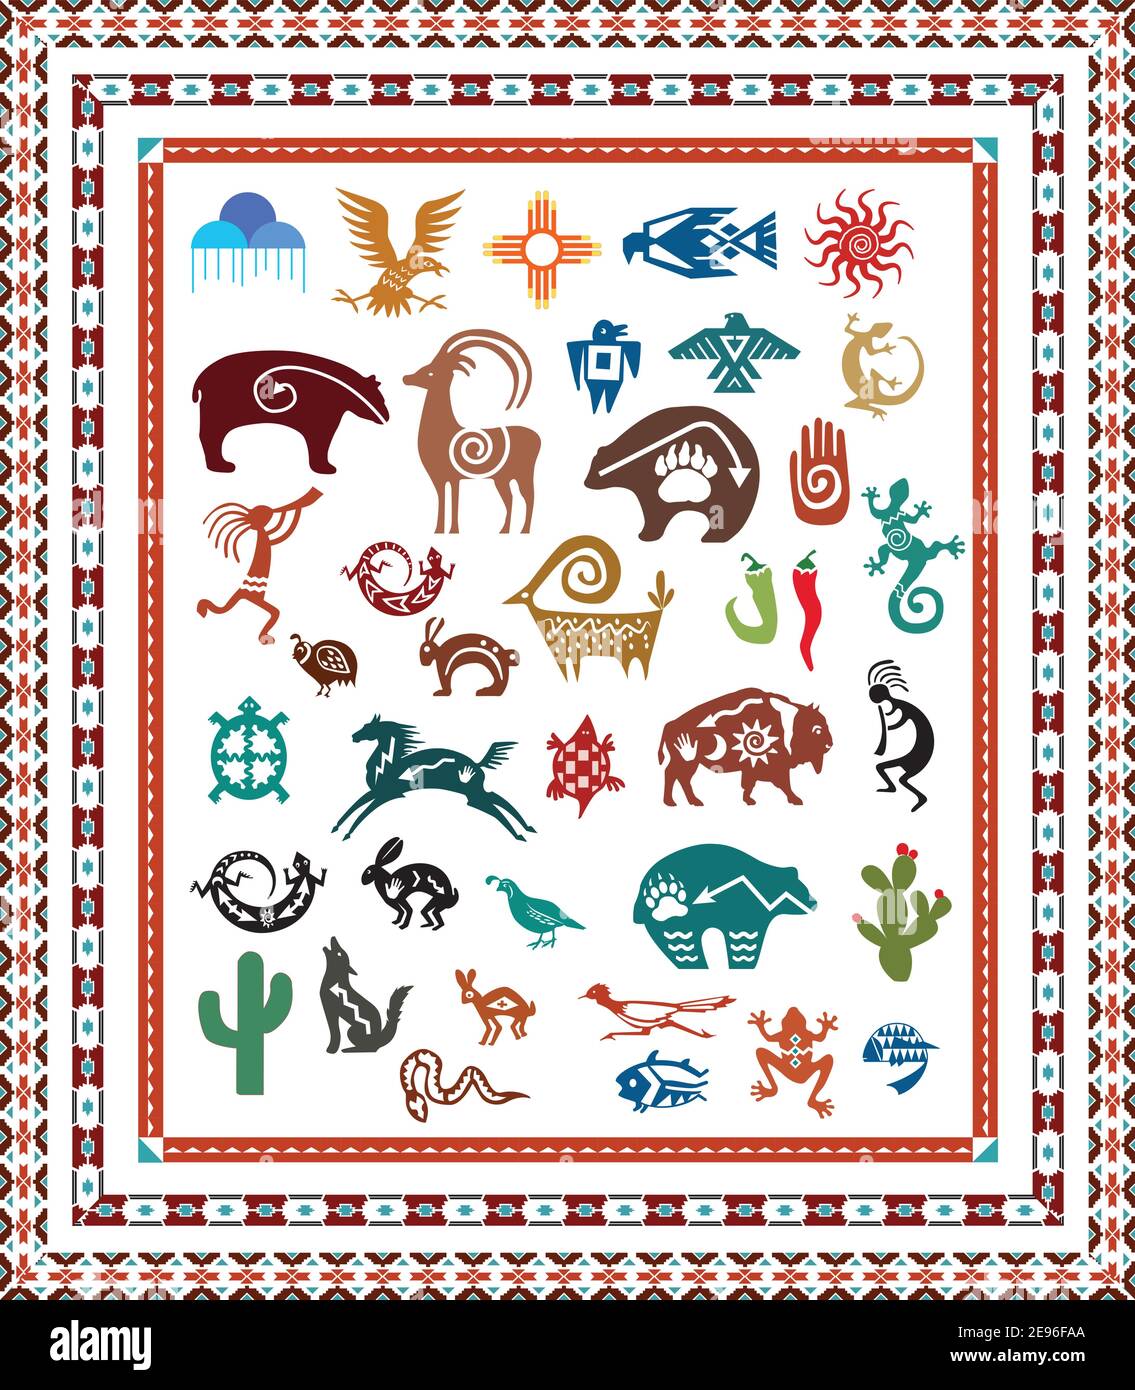 A variety of southwest icons, animals and border designs. Vector illustration. Stock Vector